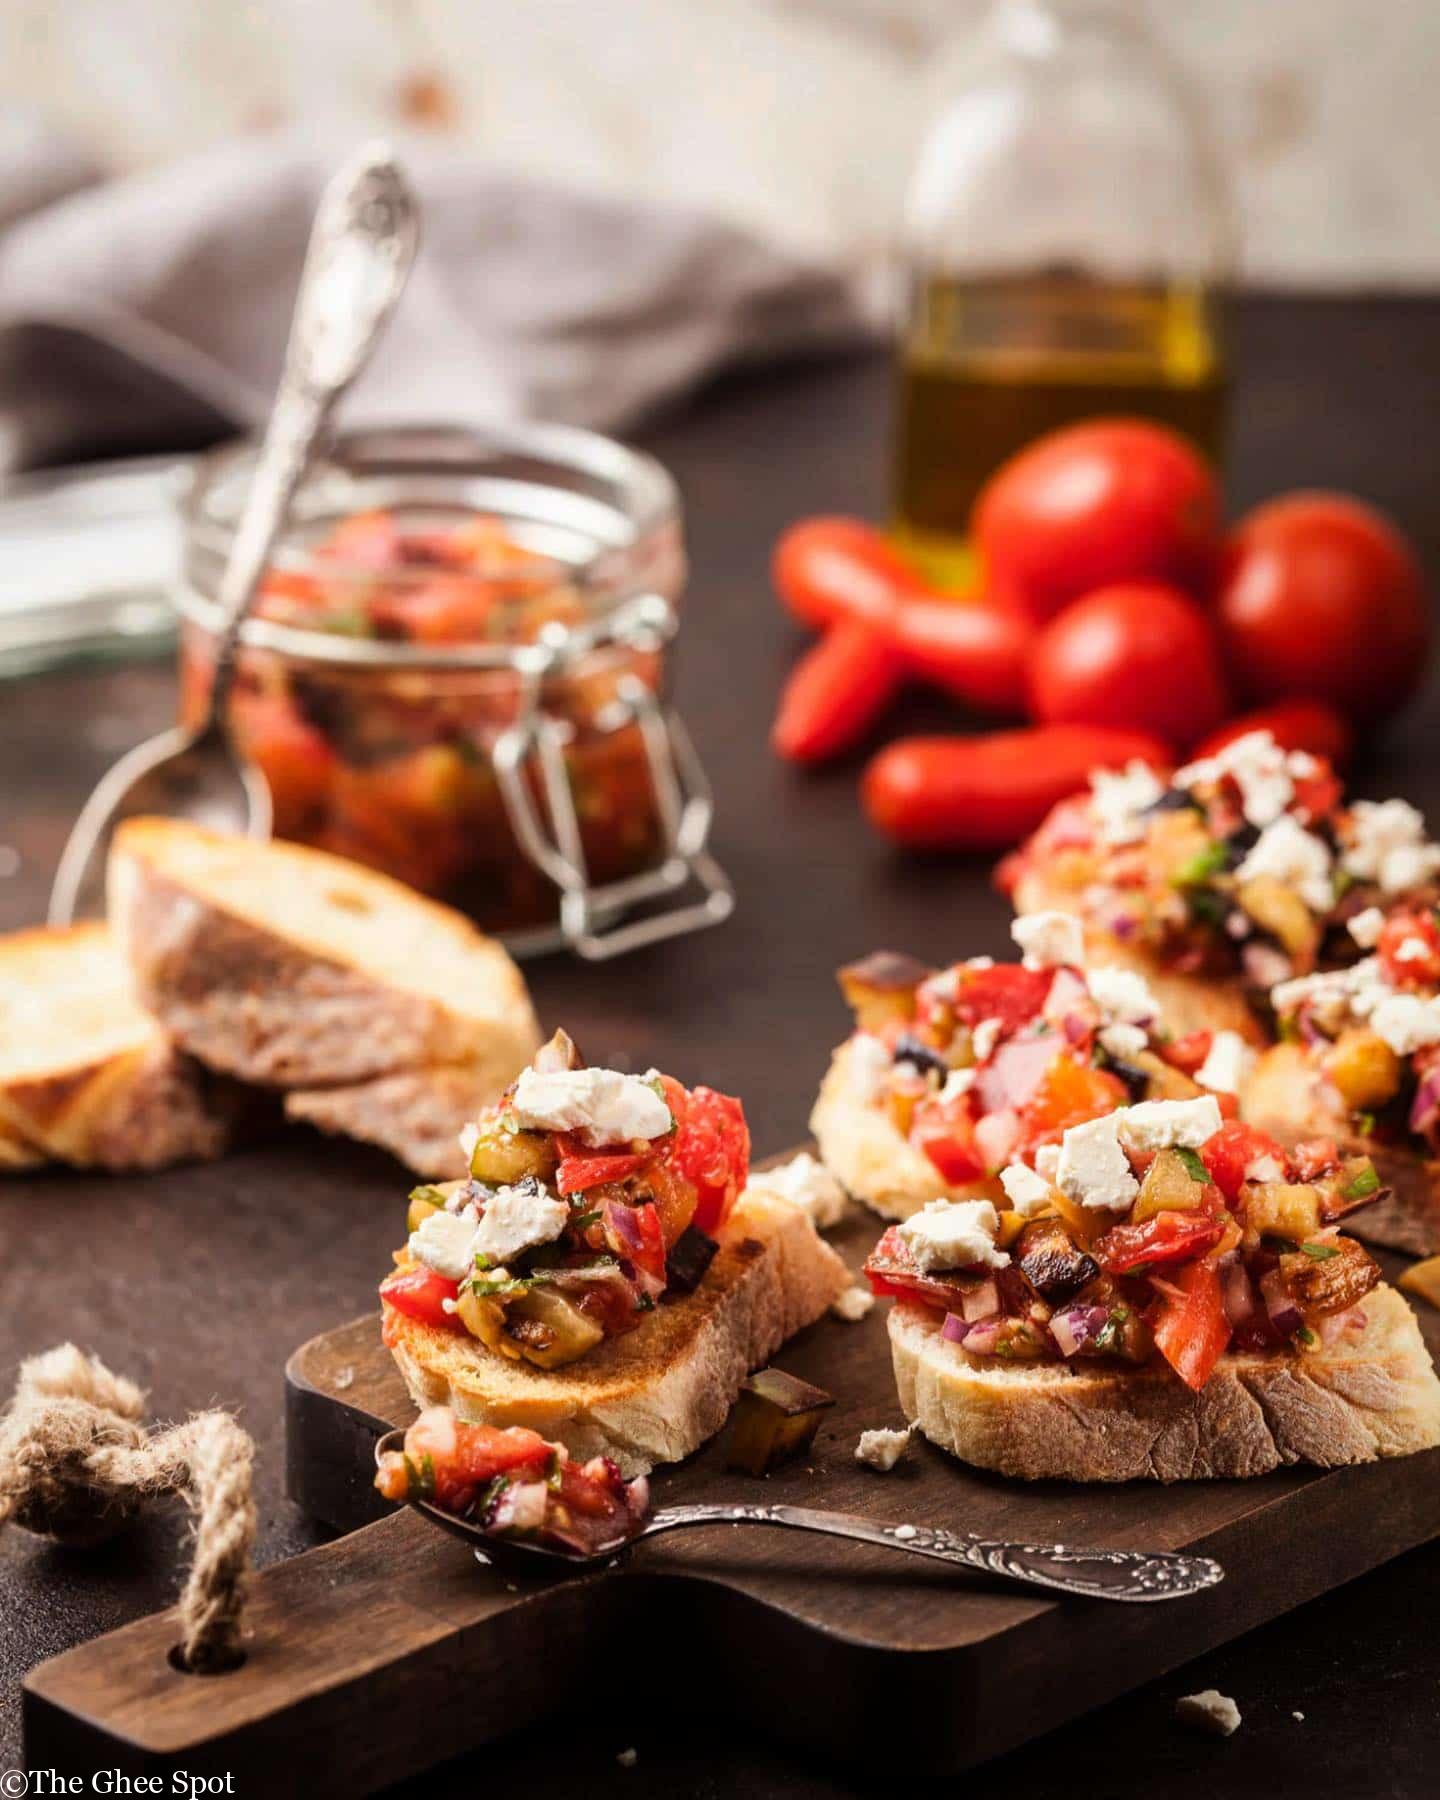 Cooking is overrated but bruschetta is not. Homemade tapenade, fresh semi- dried herbed tomatoes..oh and of course we made the bread. Thanks @the_delectable_kitchen and @indianfusionkitchenrecipes for forcing me to take a break from work for #italiancuisineforall 

#thegheespot #madefromscratch